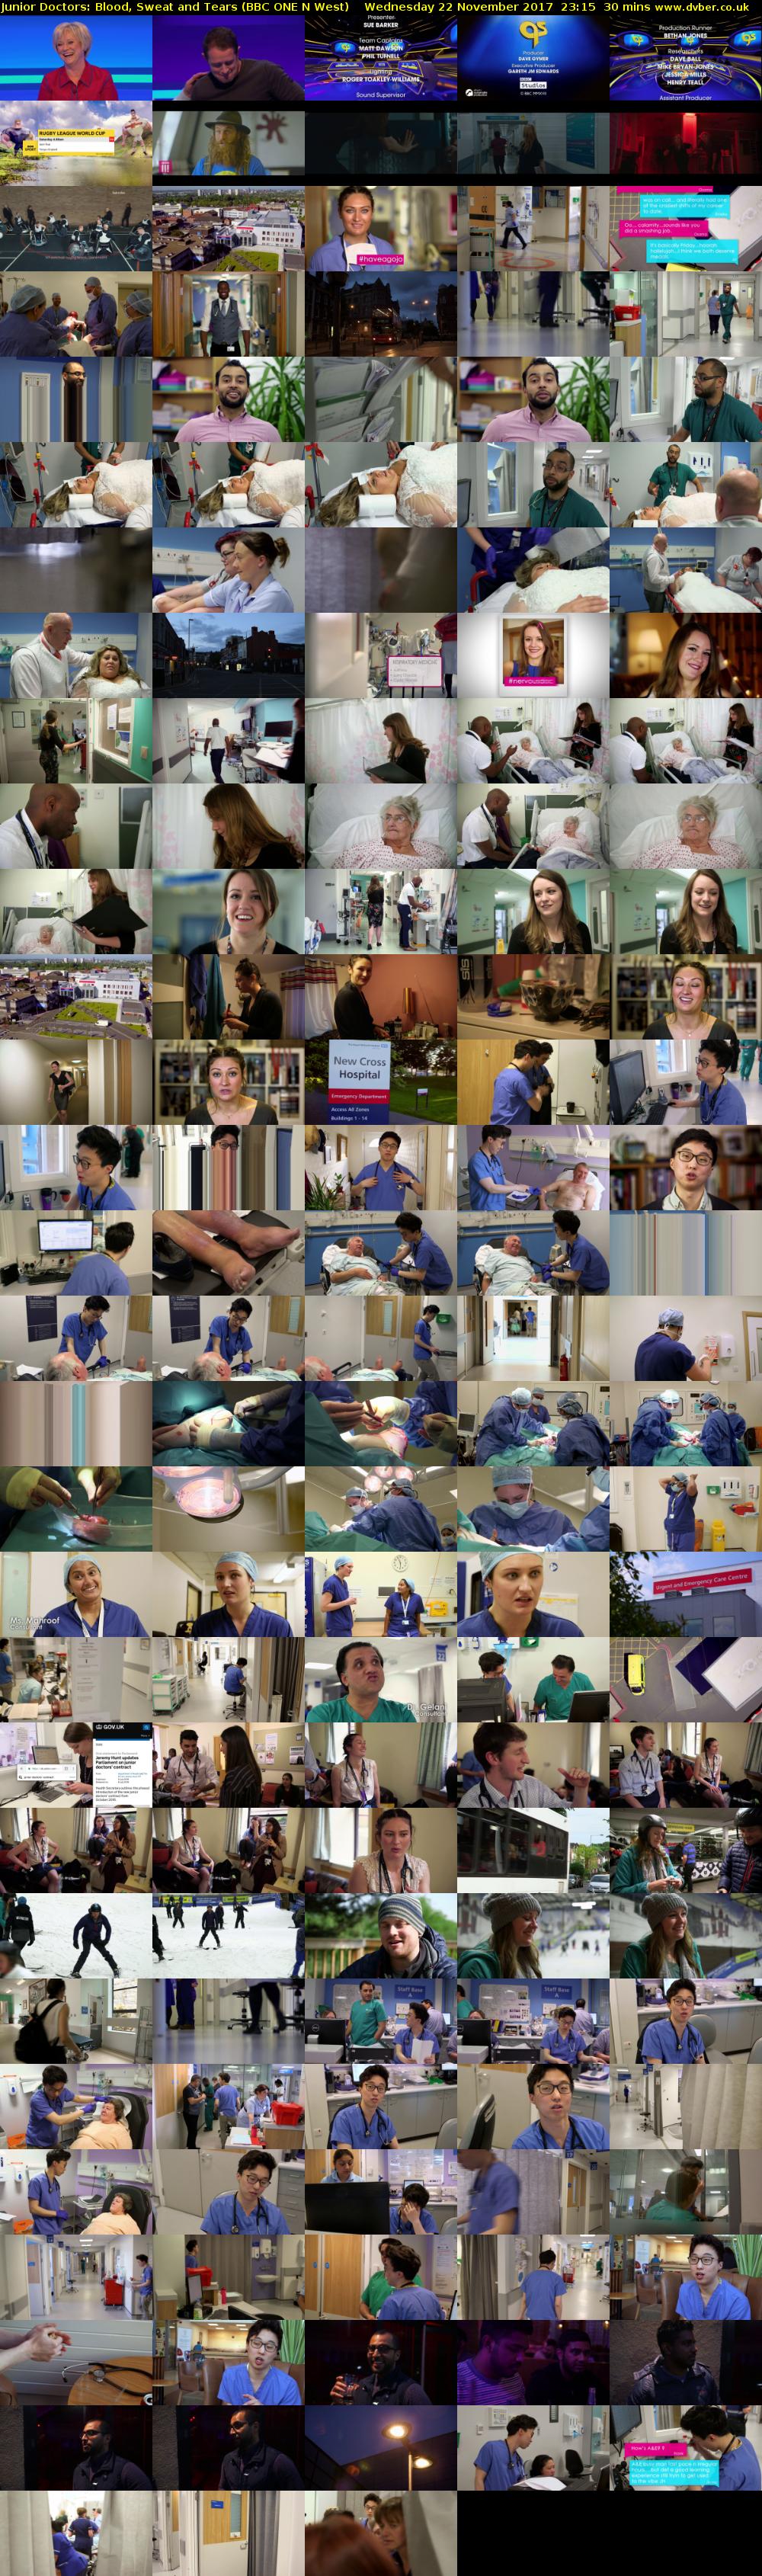 Junior Doctors: Blood, Sweat and Tears (BBC ONE N West) Wednesday 22 November 2017 23:15 - 23:45